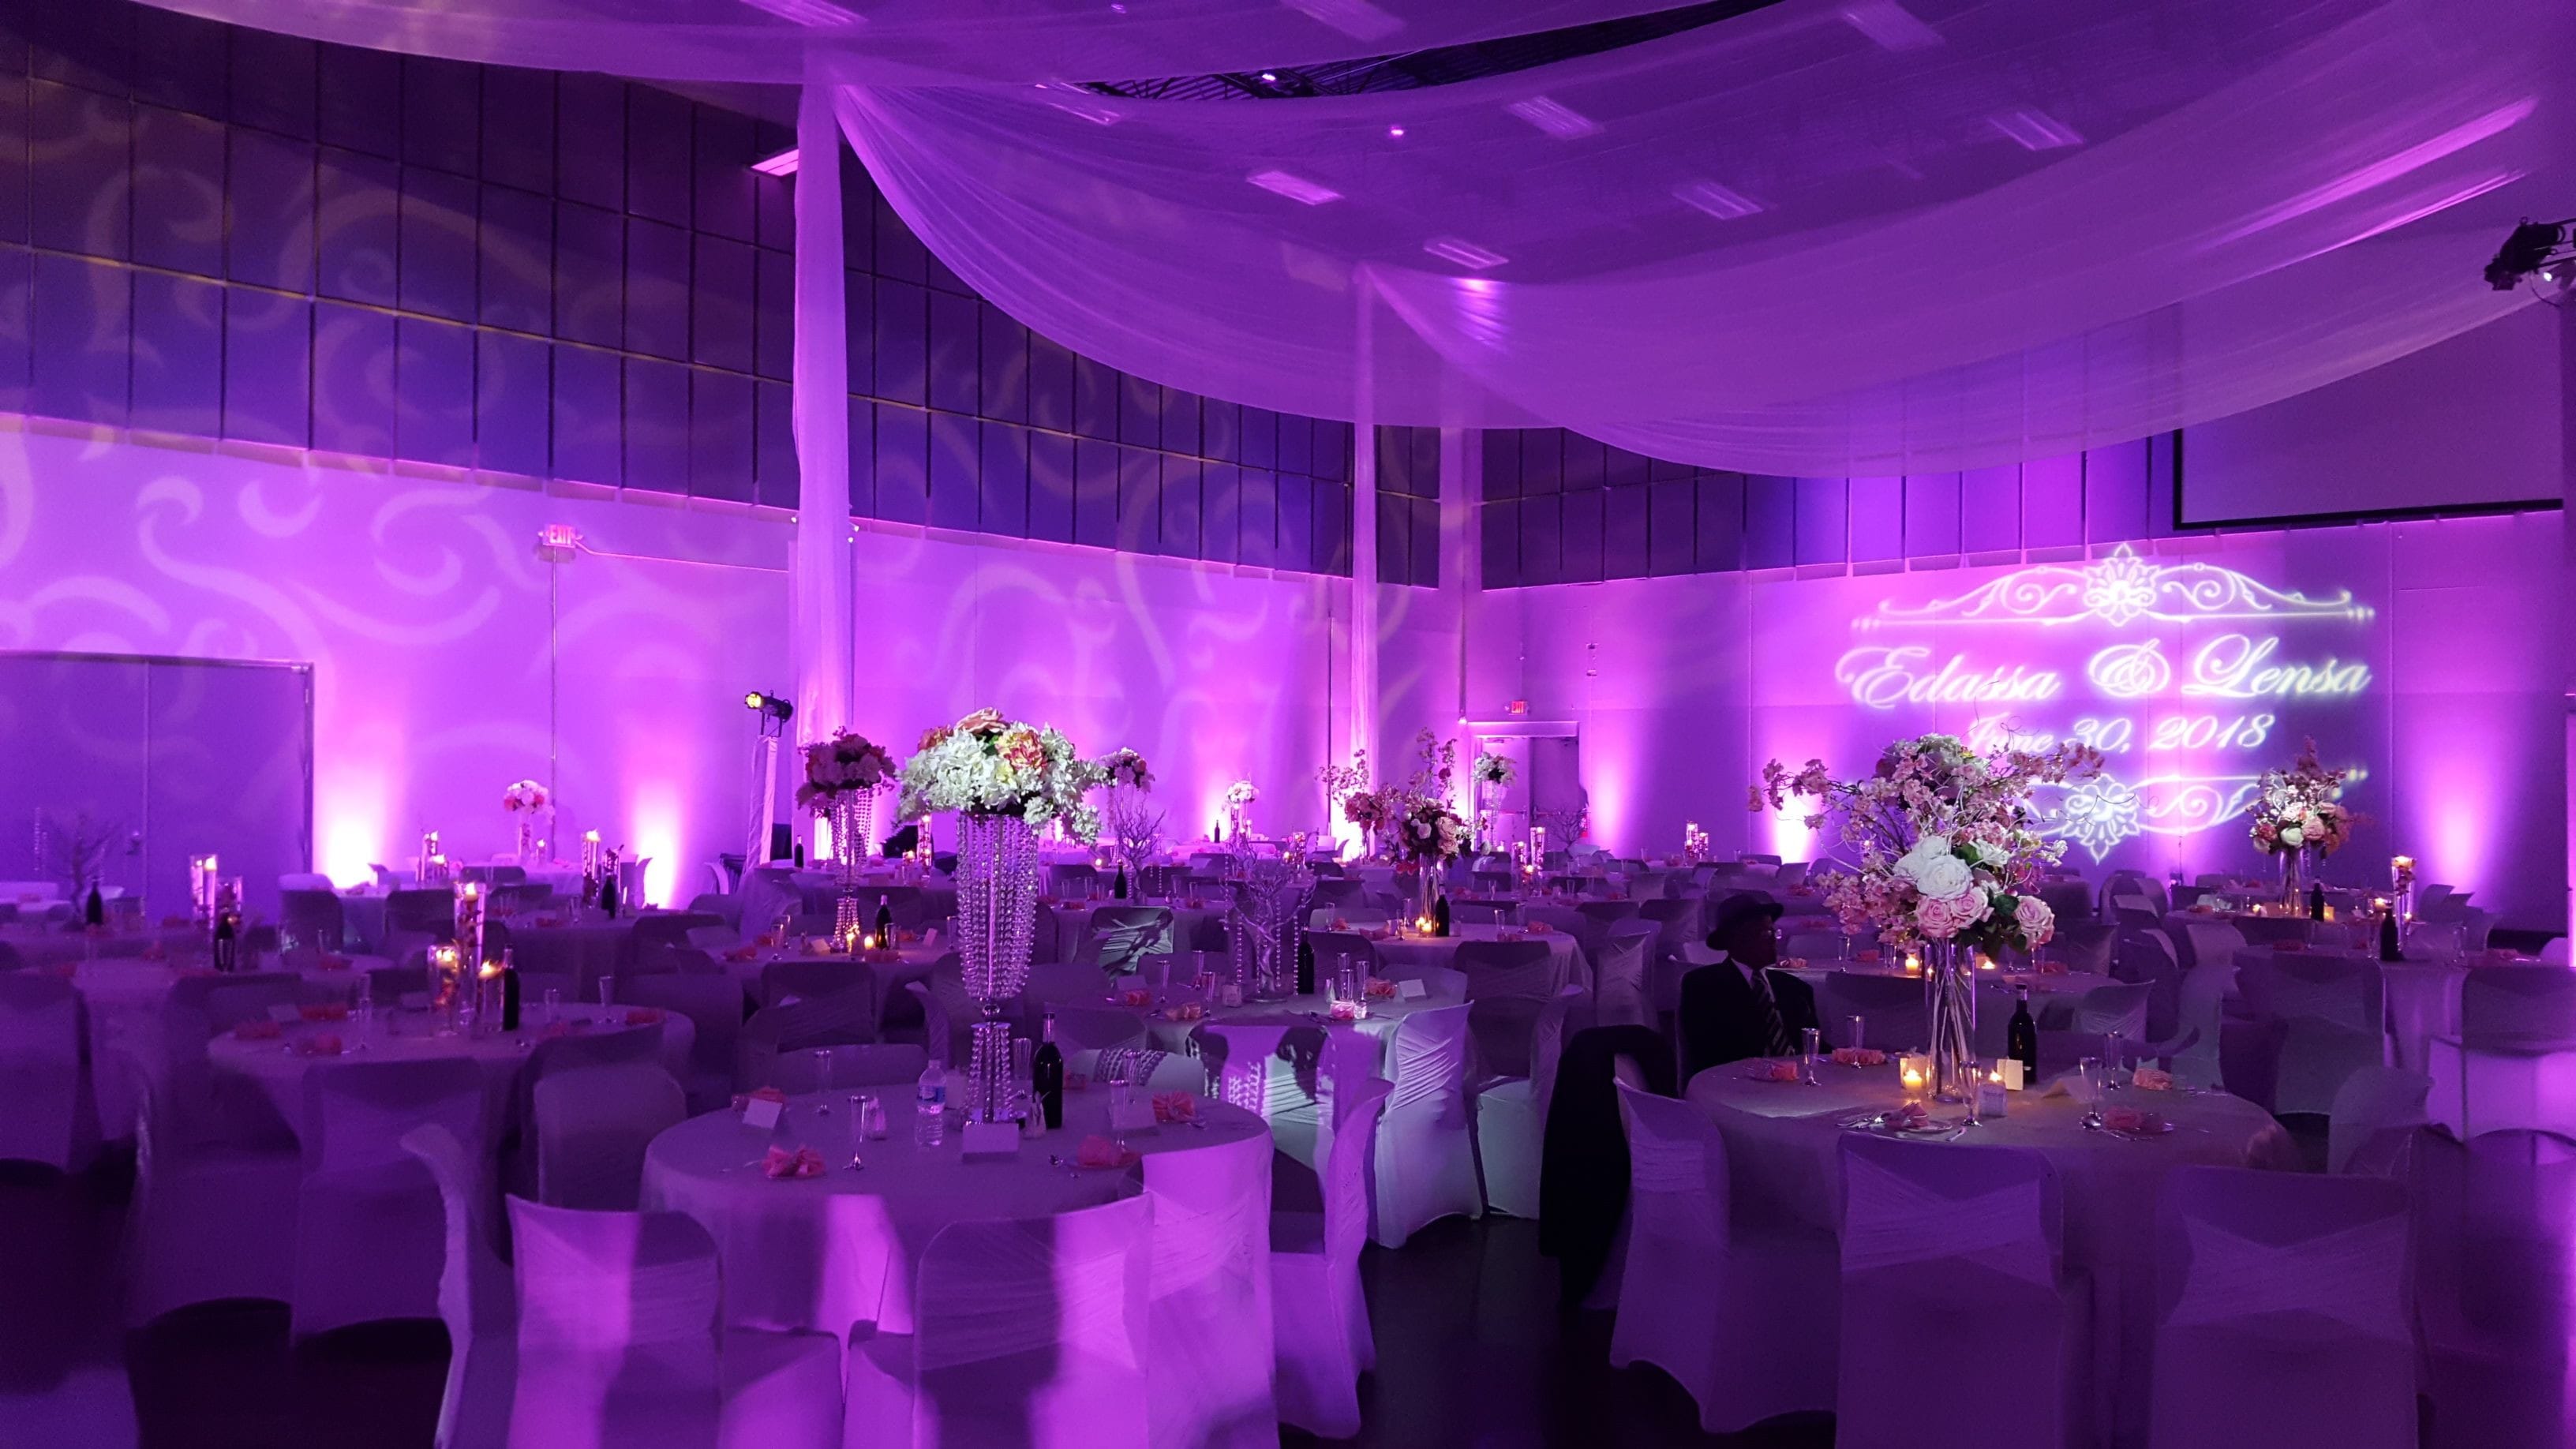 Passion Event Center, Fridley.
Wedding lighting in Magenta pink. Pin spots on flowers, wedding monogram, gobo patterns on walls.